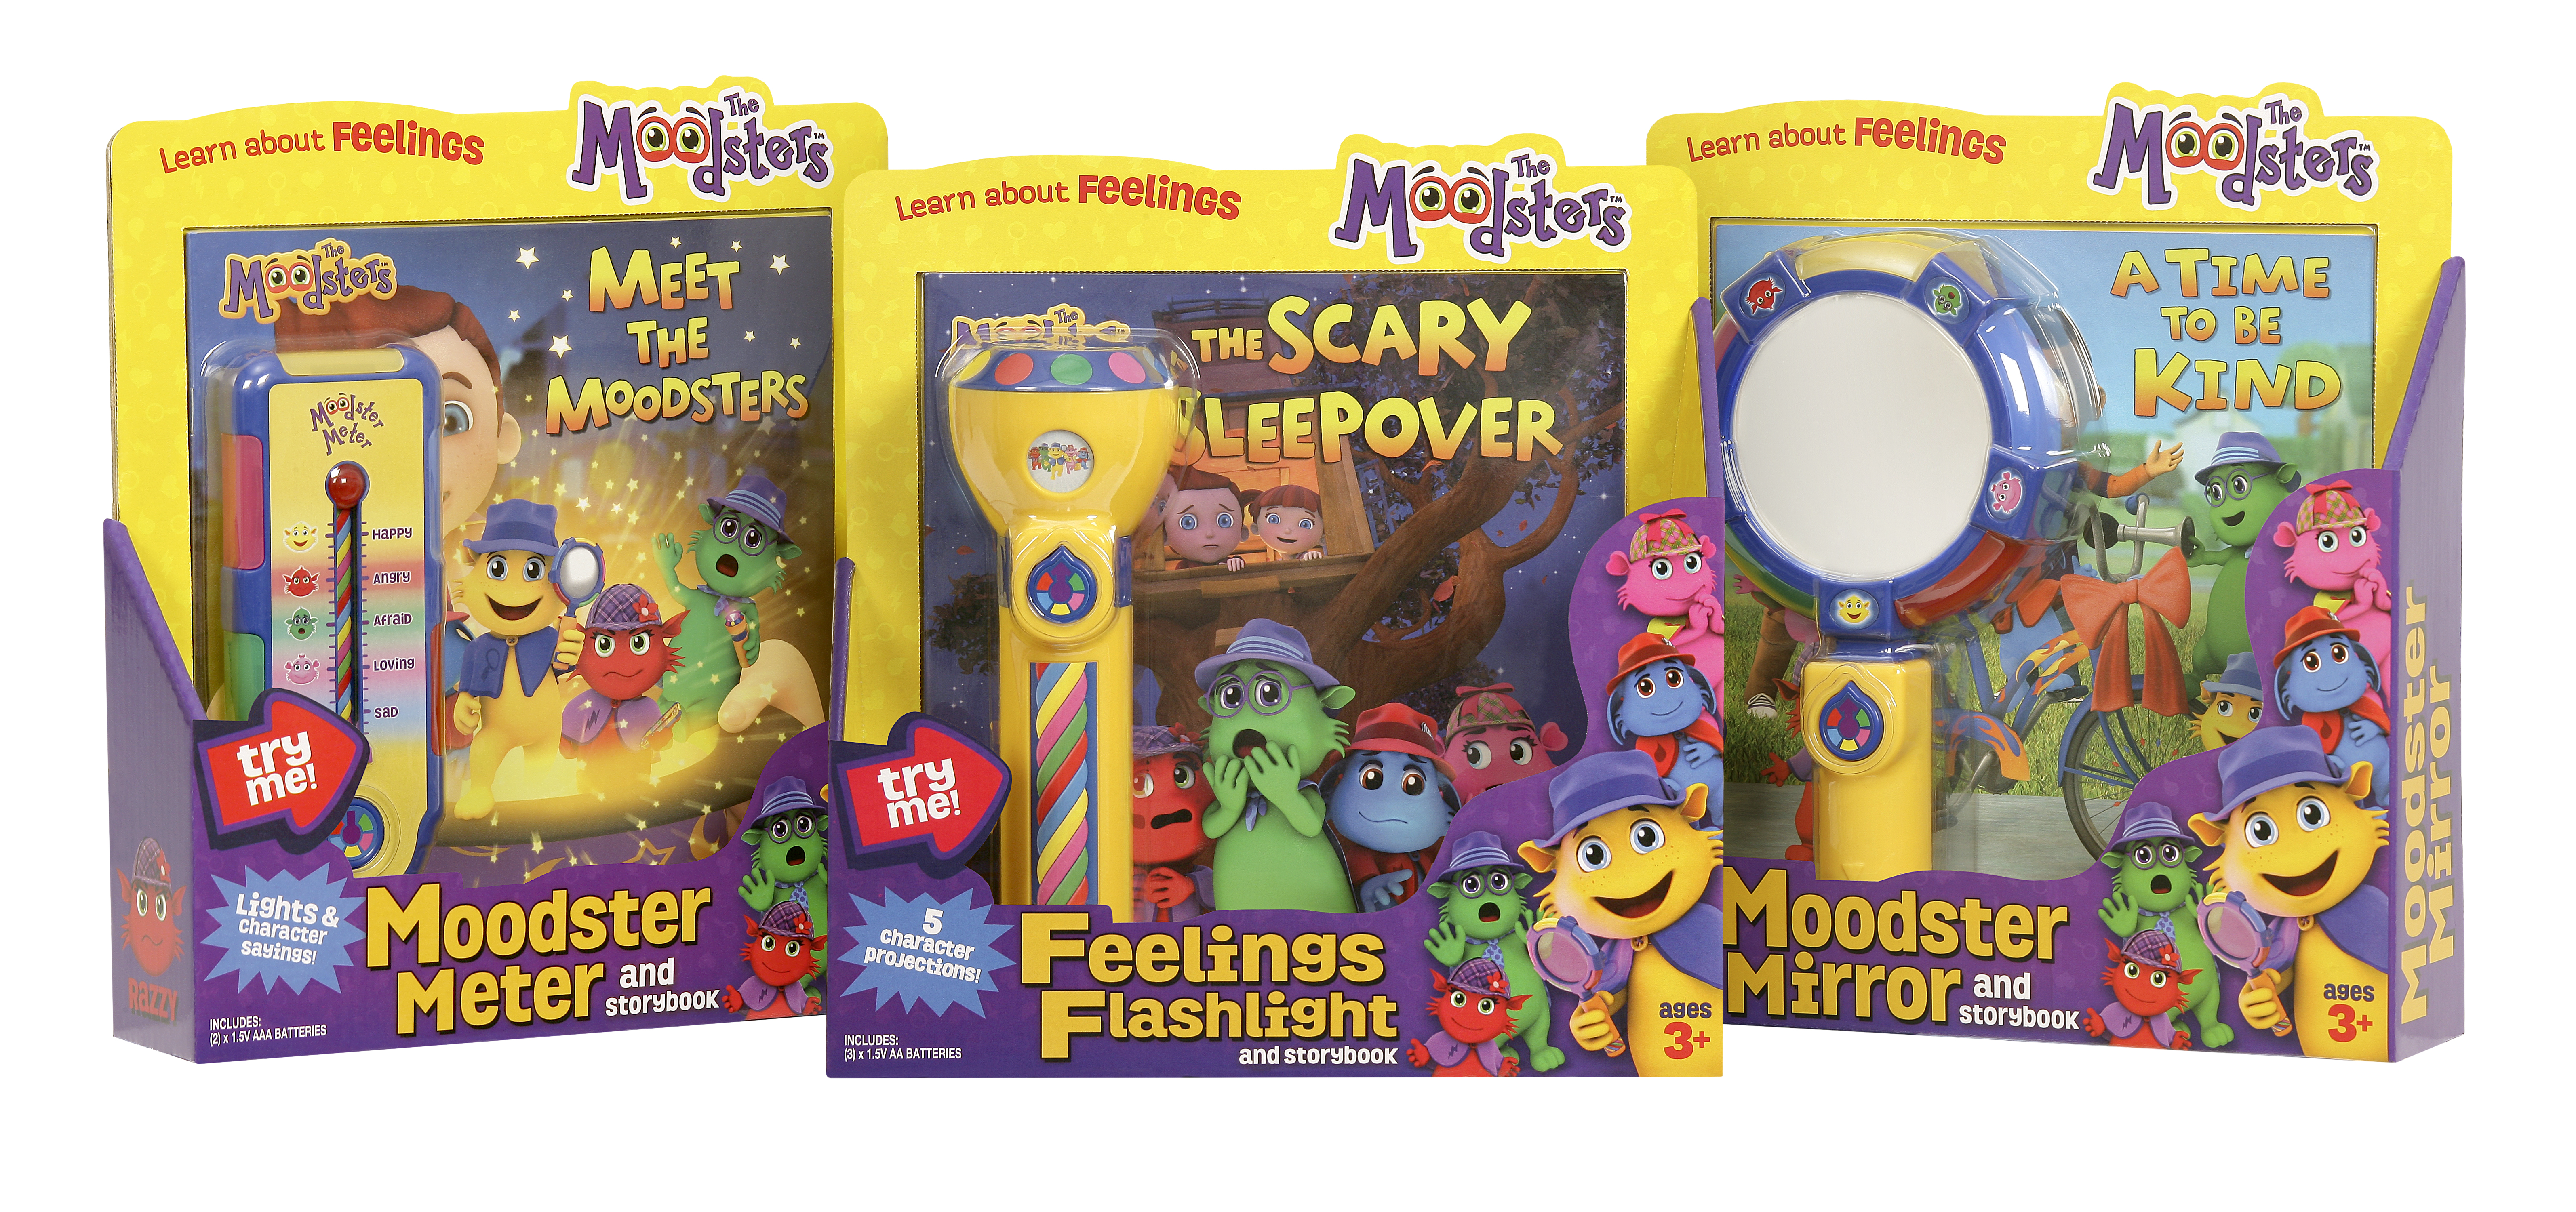 The Moodsters products